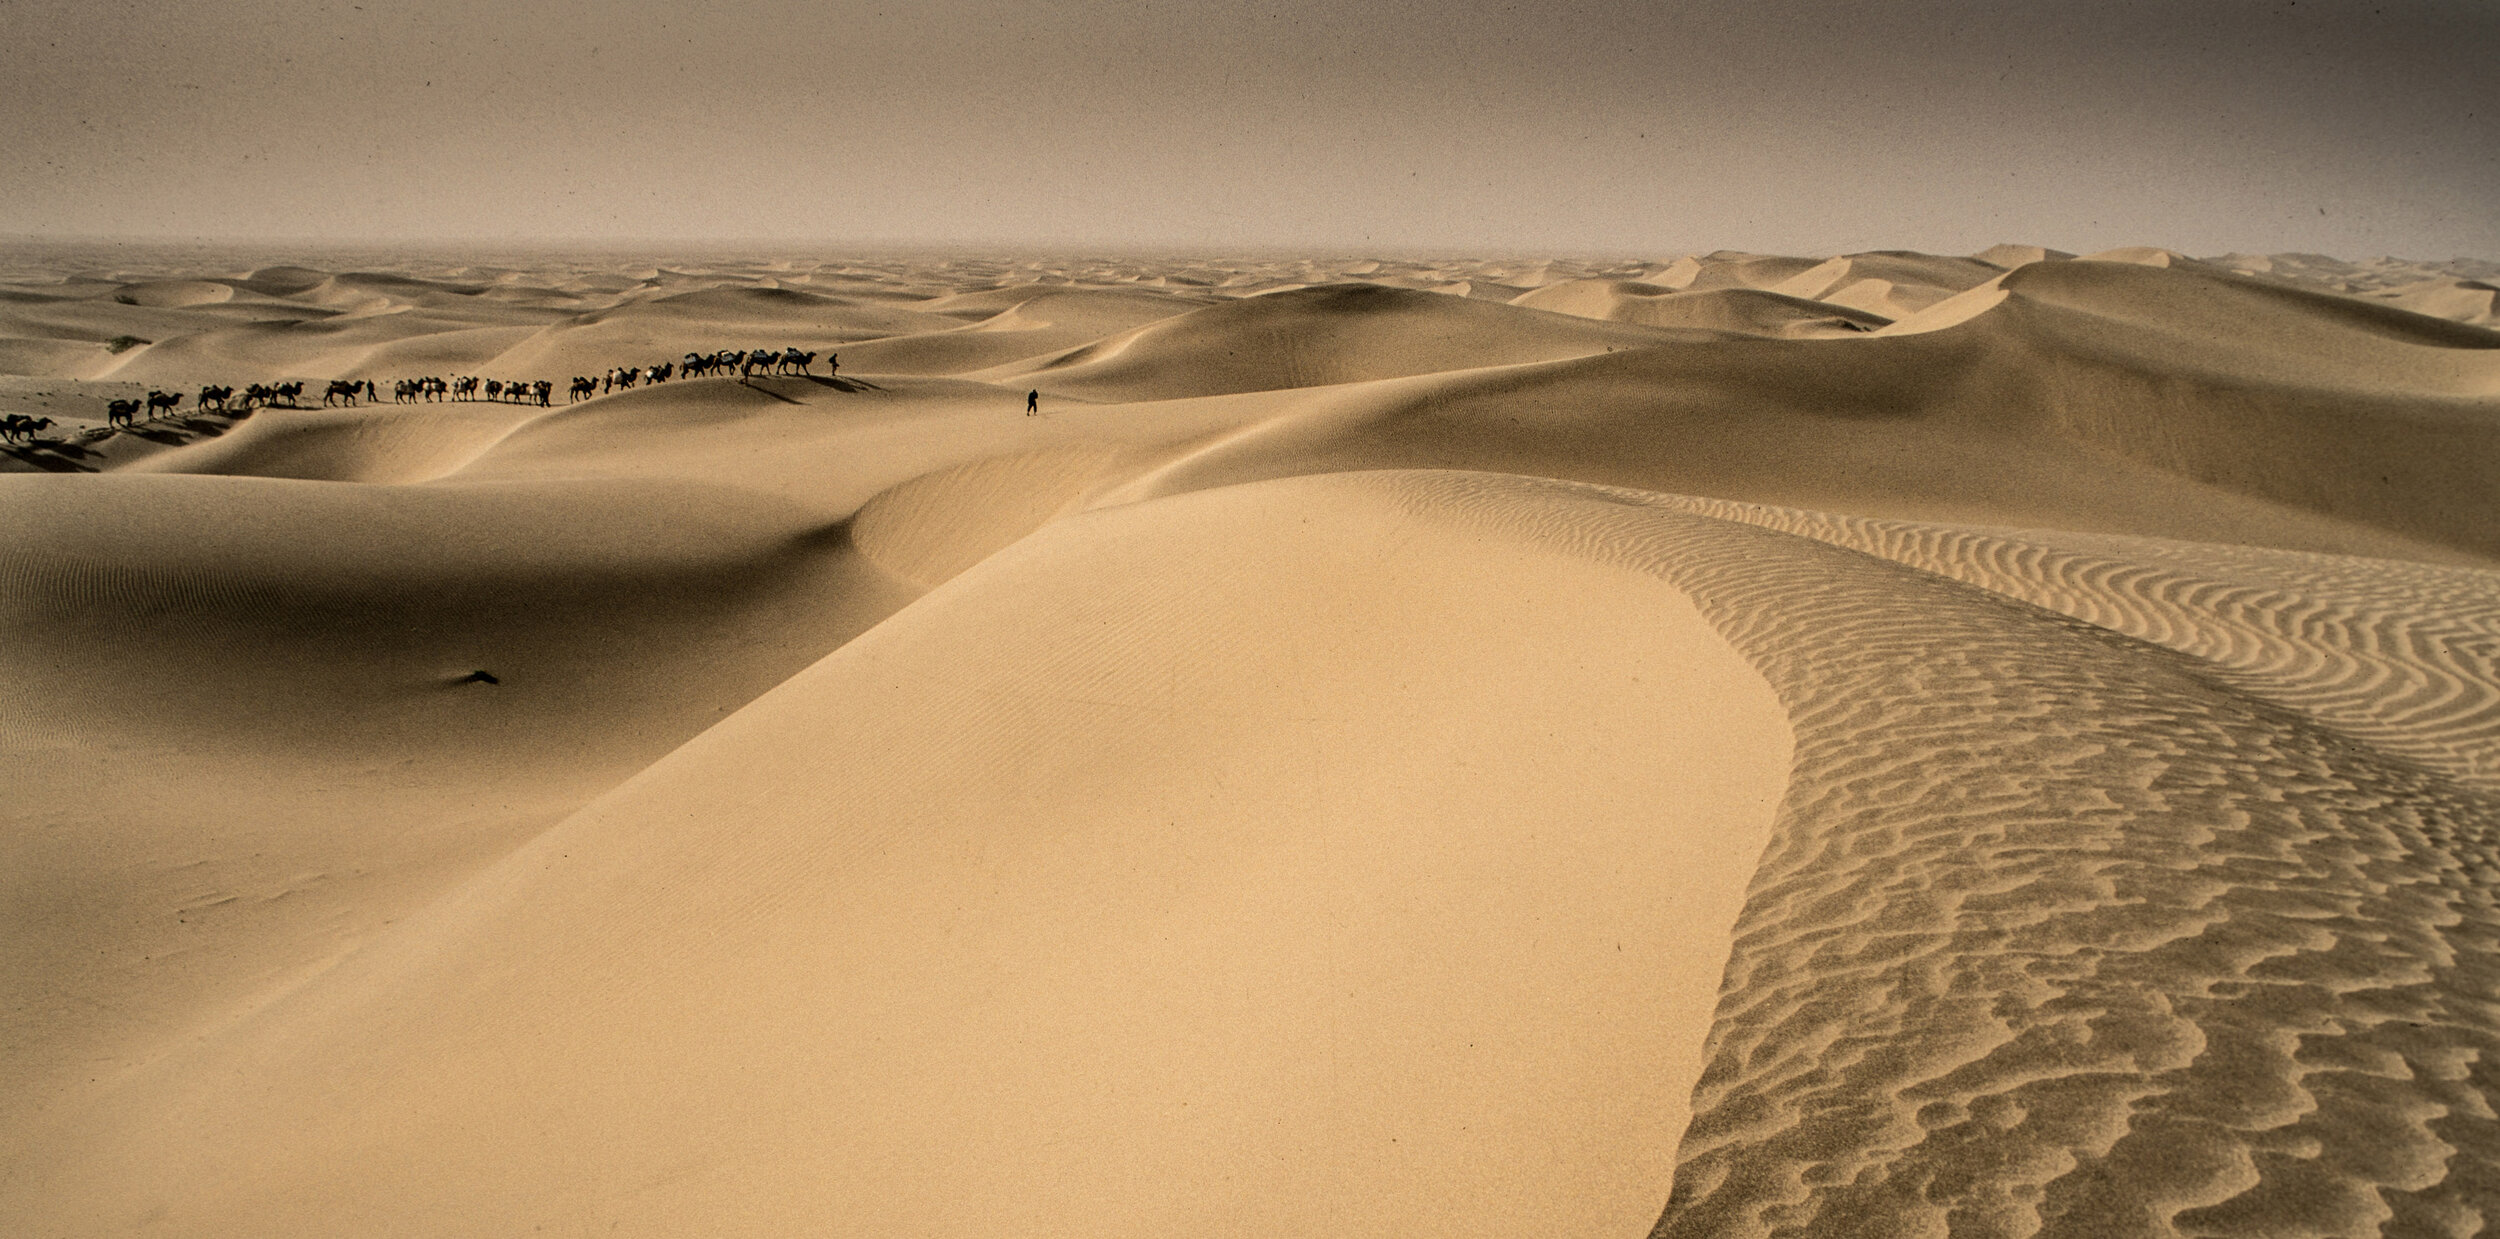  The Taklamakan Desert is the second largest sea of sand in the world. Only the Sahara is larger.  